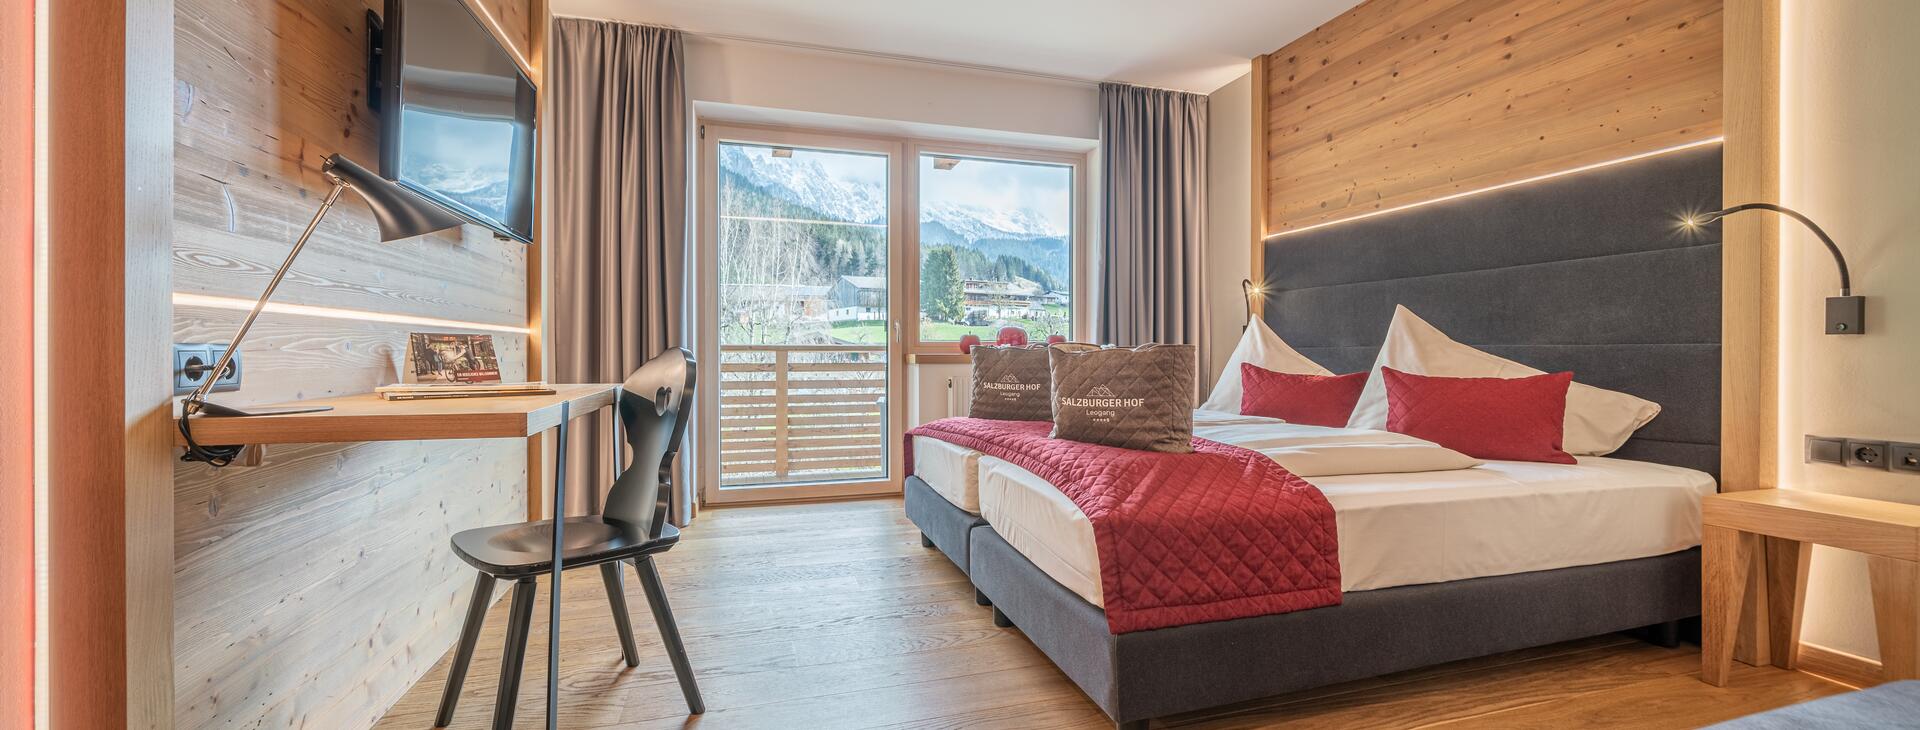 hotel room in the Alps